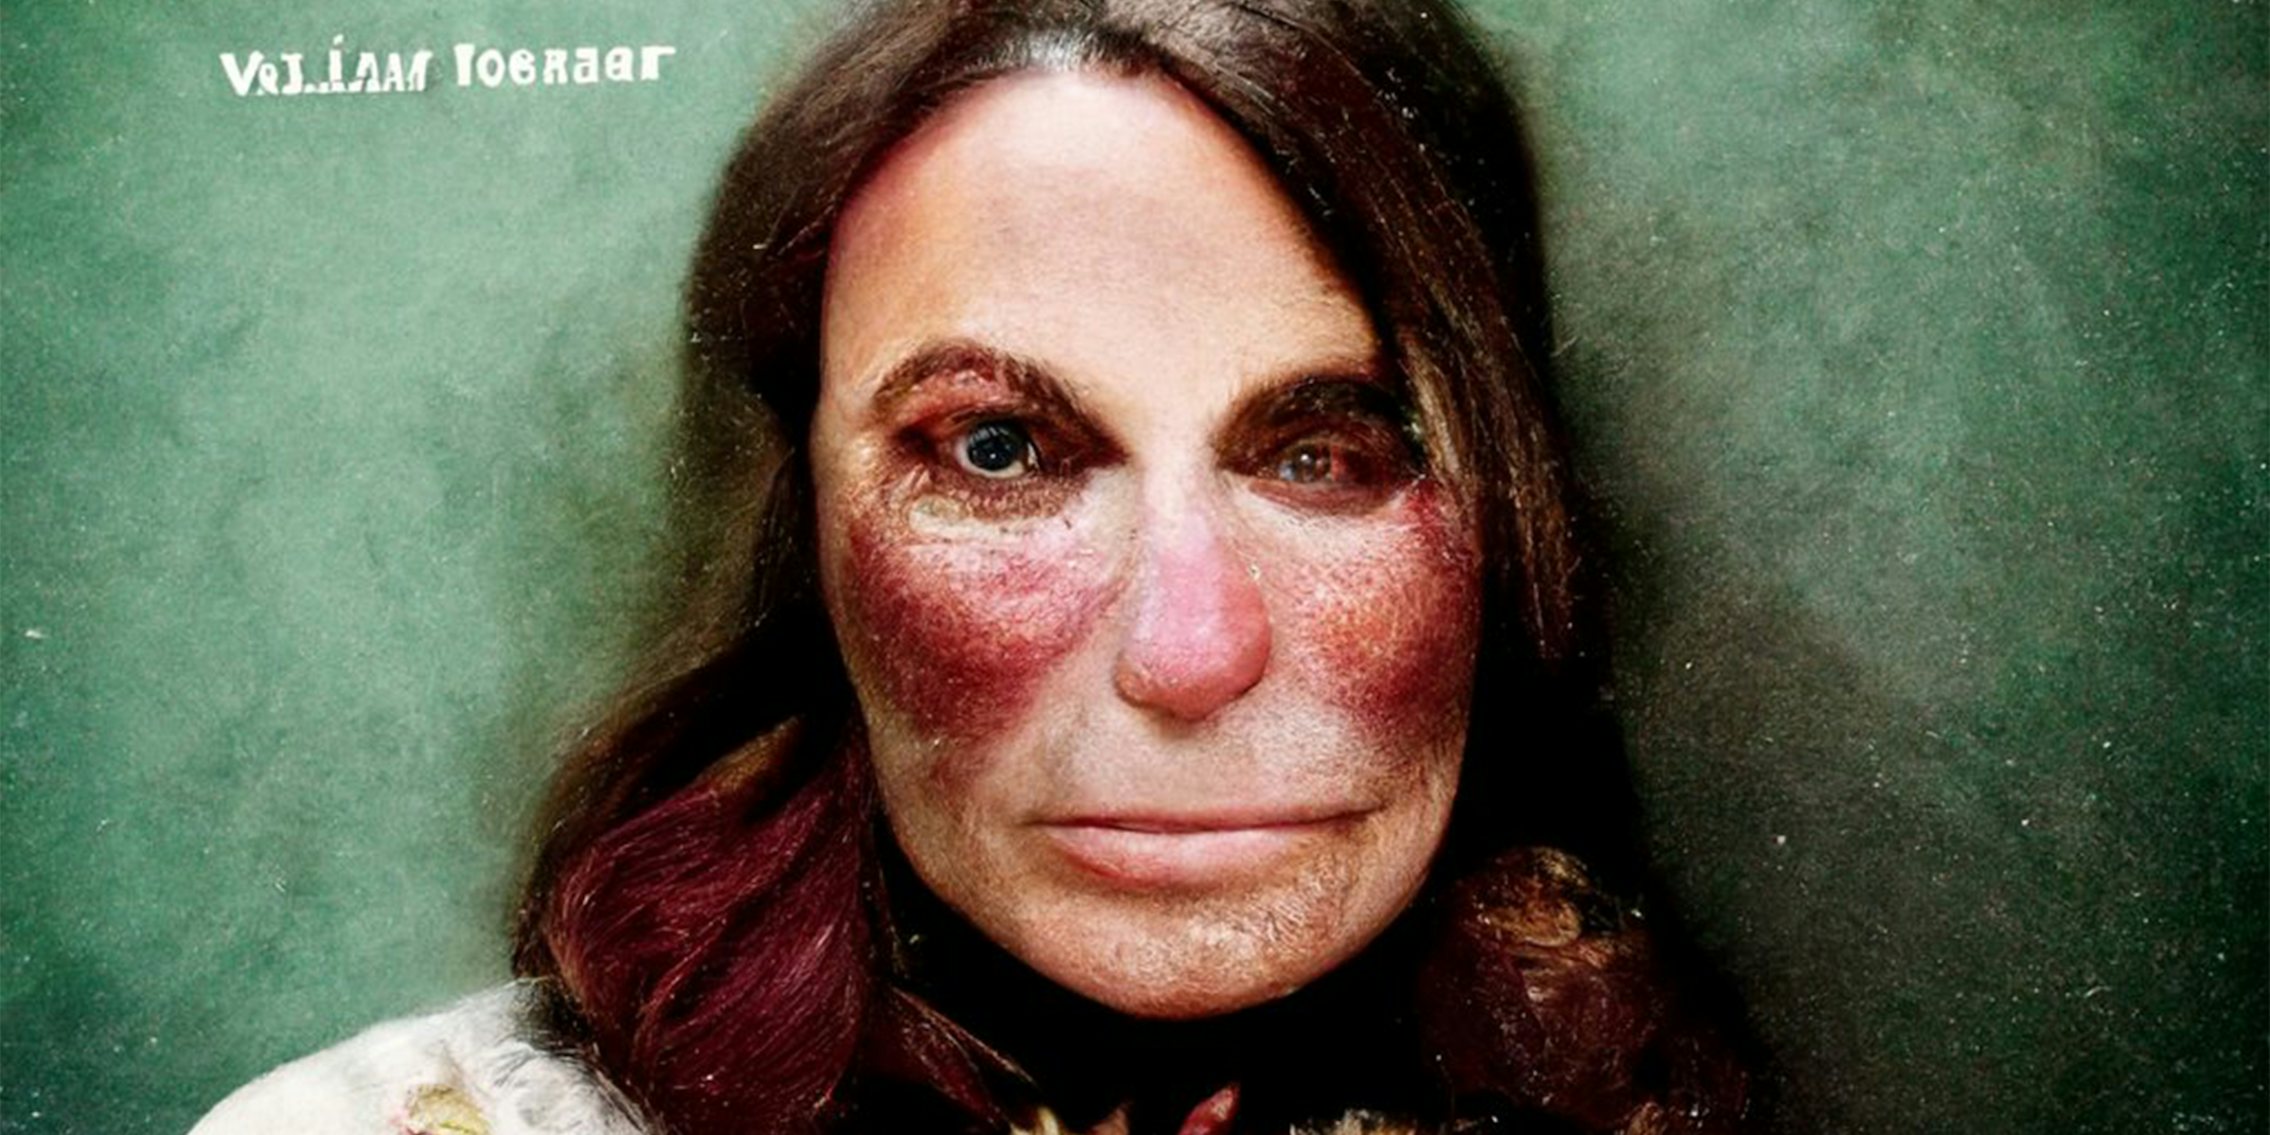 AI-generated image of a woman with rosacea